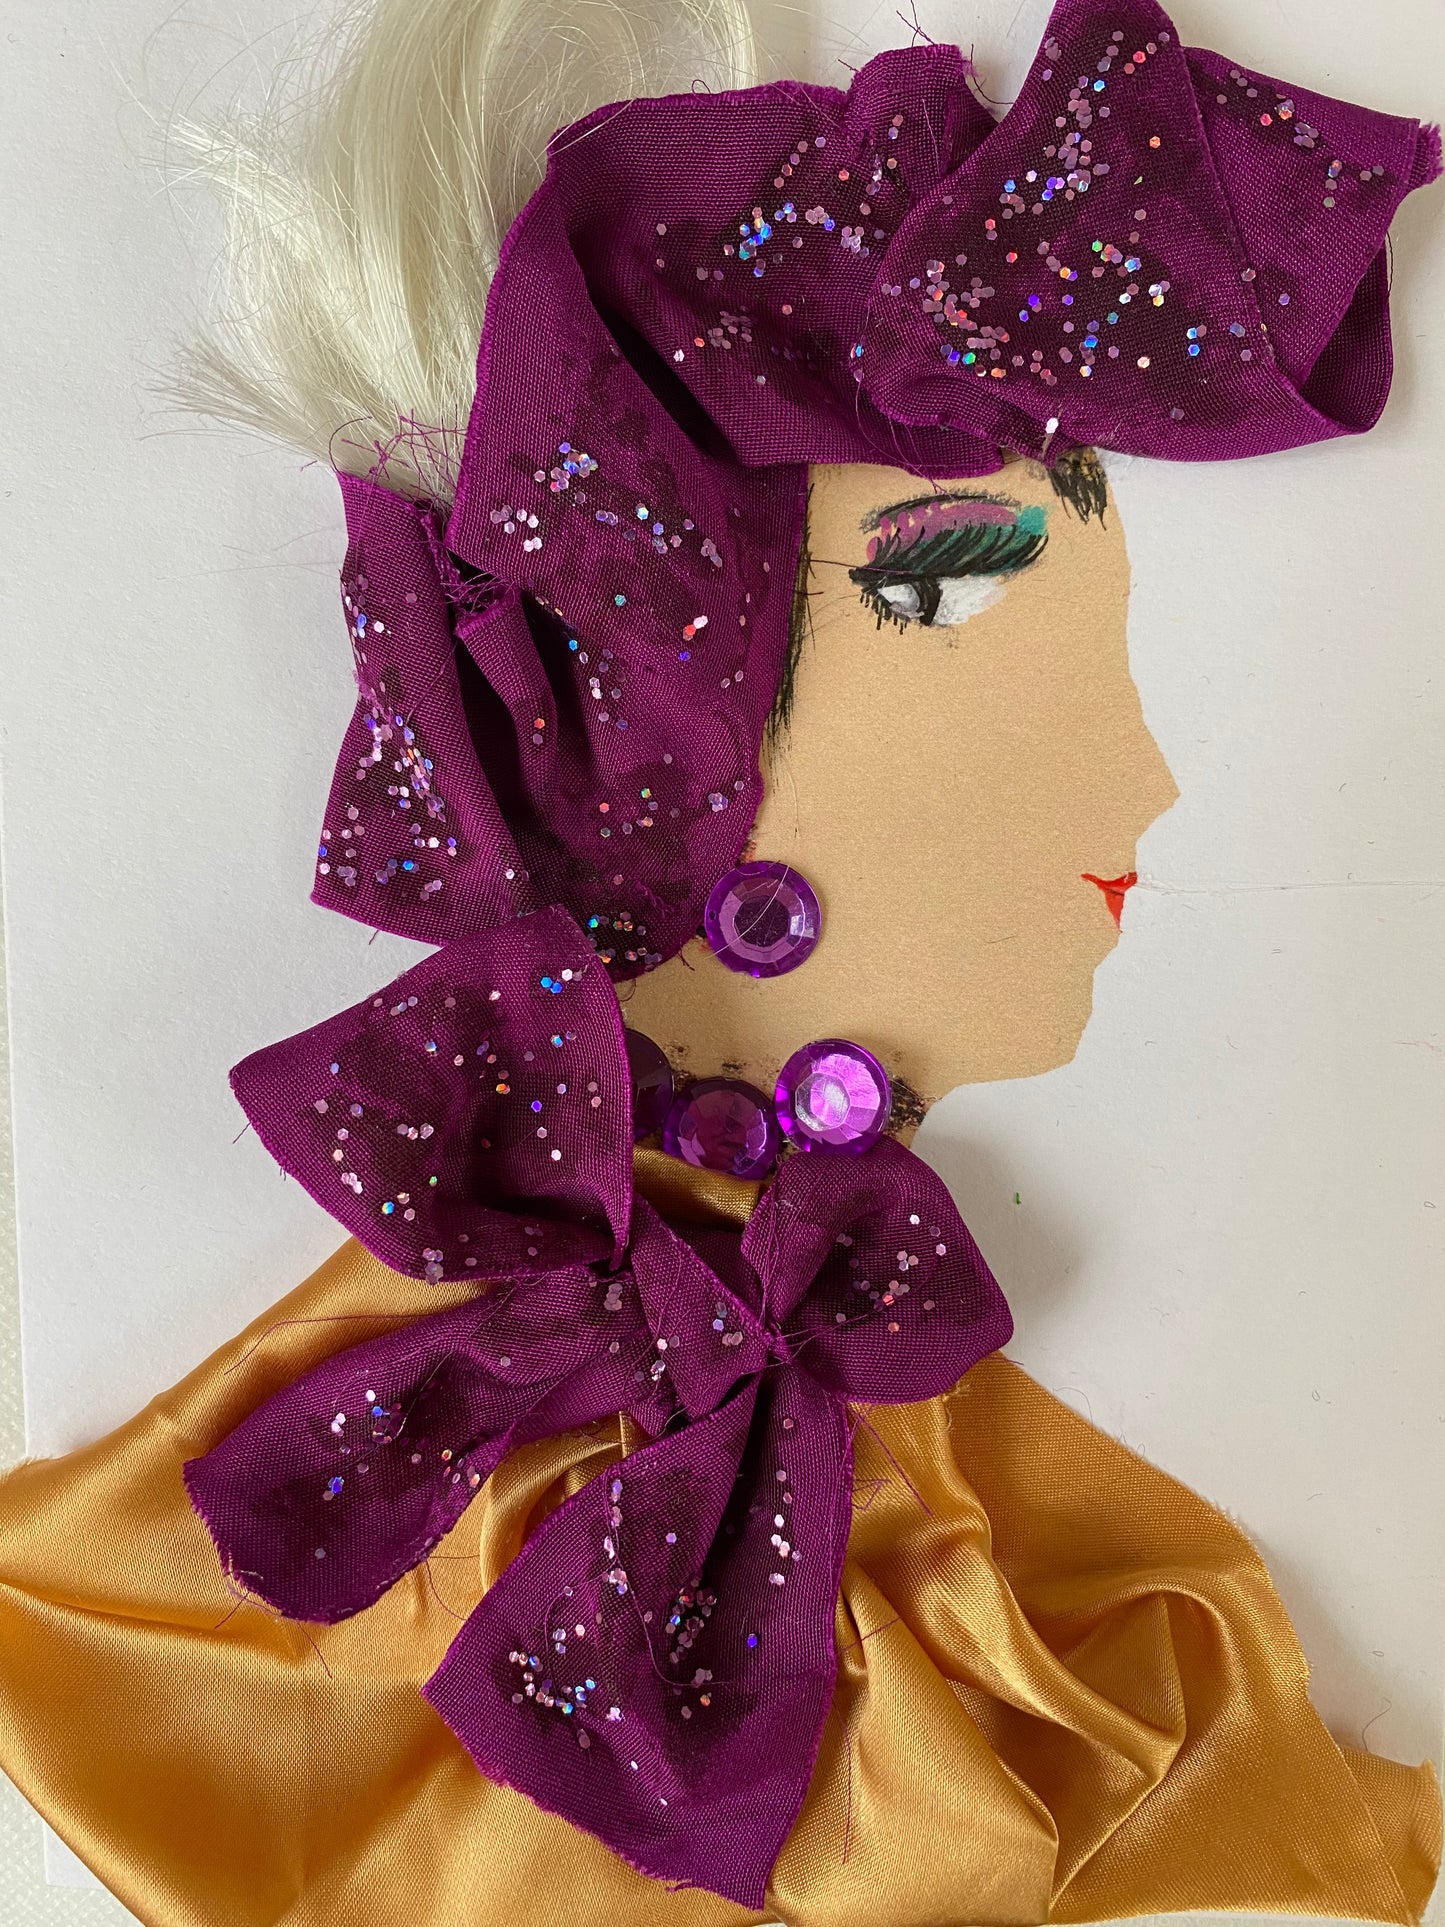 I designed this card of a woman who is wearing a sparkly purple head wrap that ties around her neck. She wears a silky golden blouse with shiny purple jewellery.